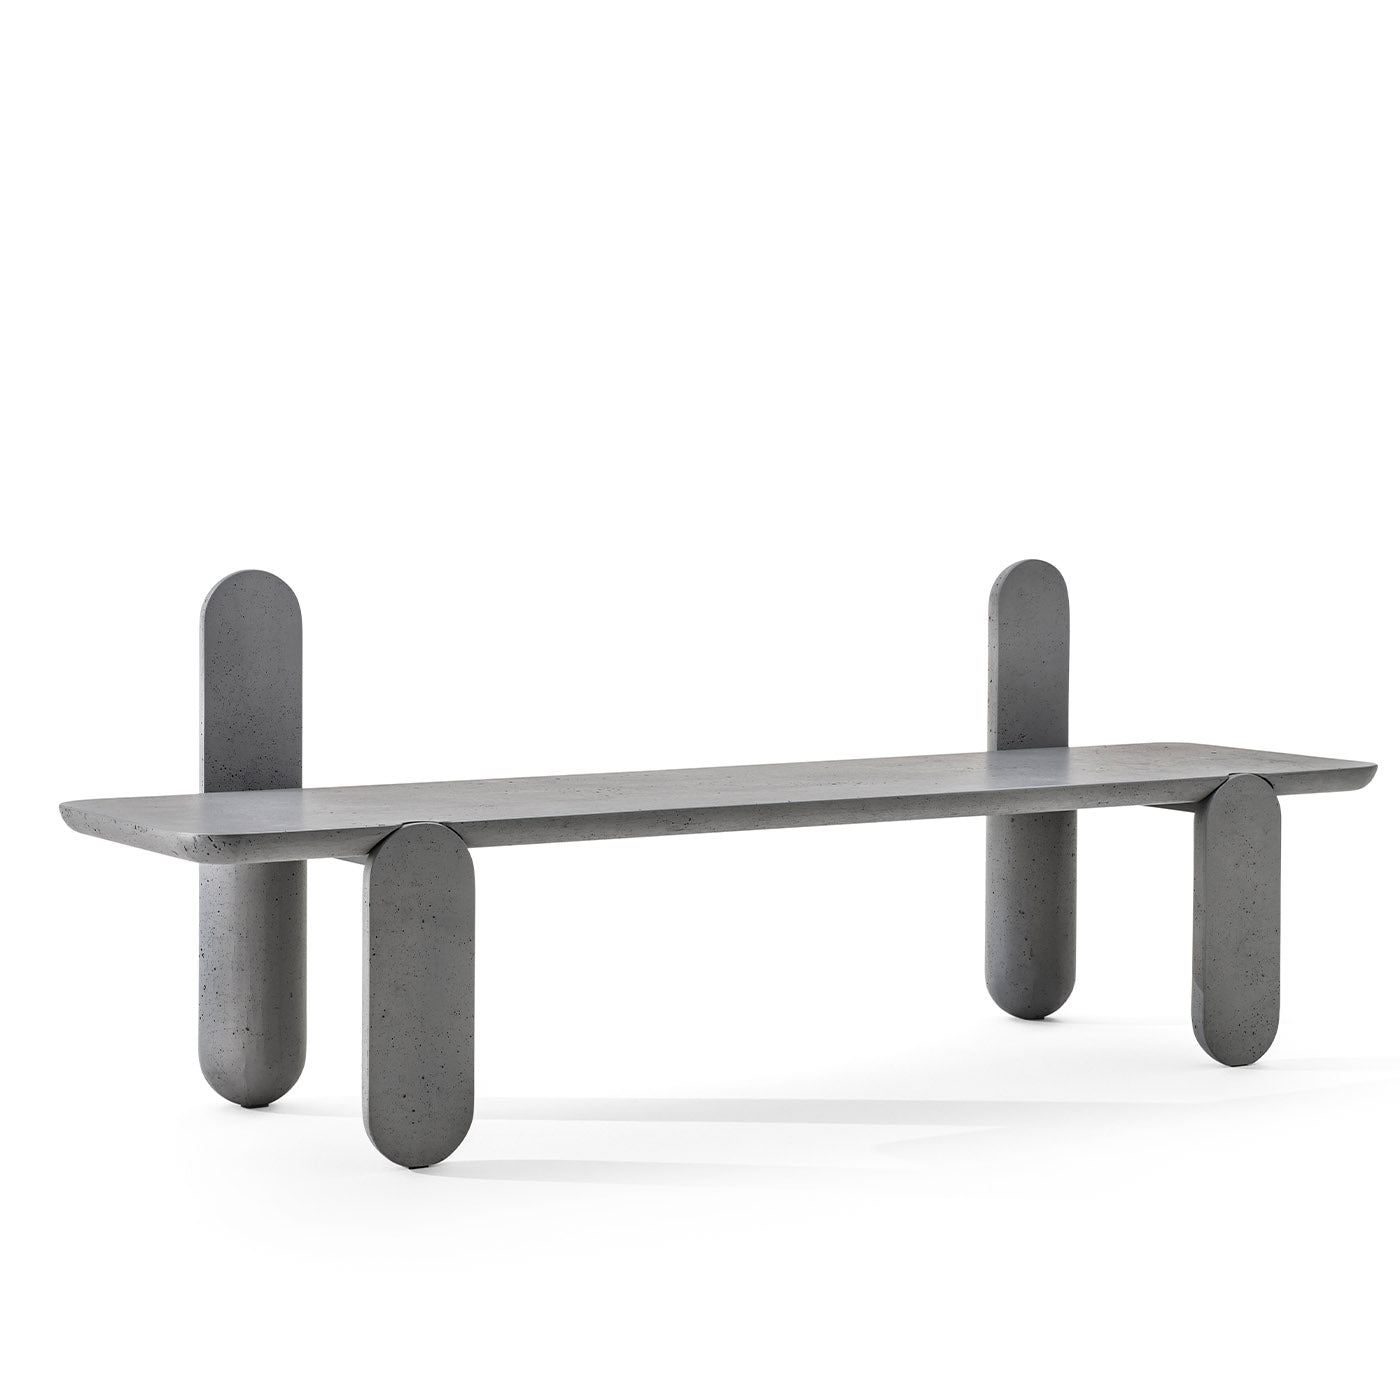 Lido Bench by Parisotto and Formenton  - Alternative view 1